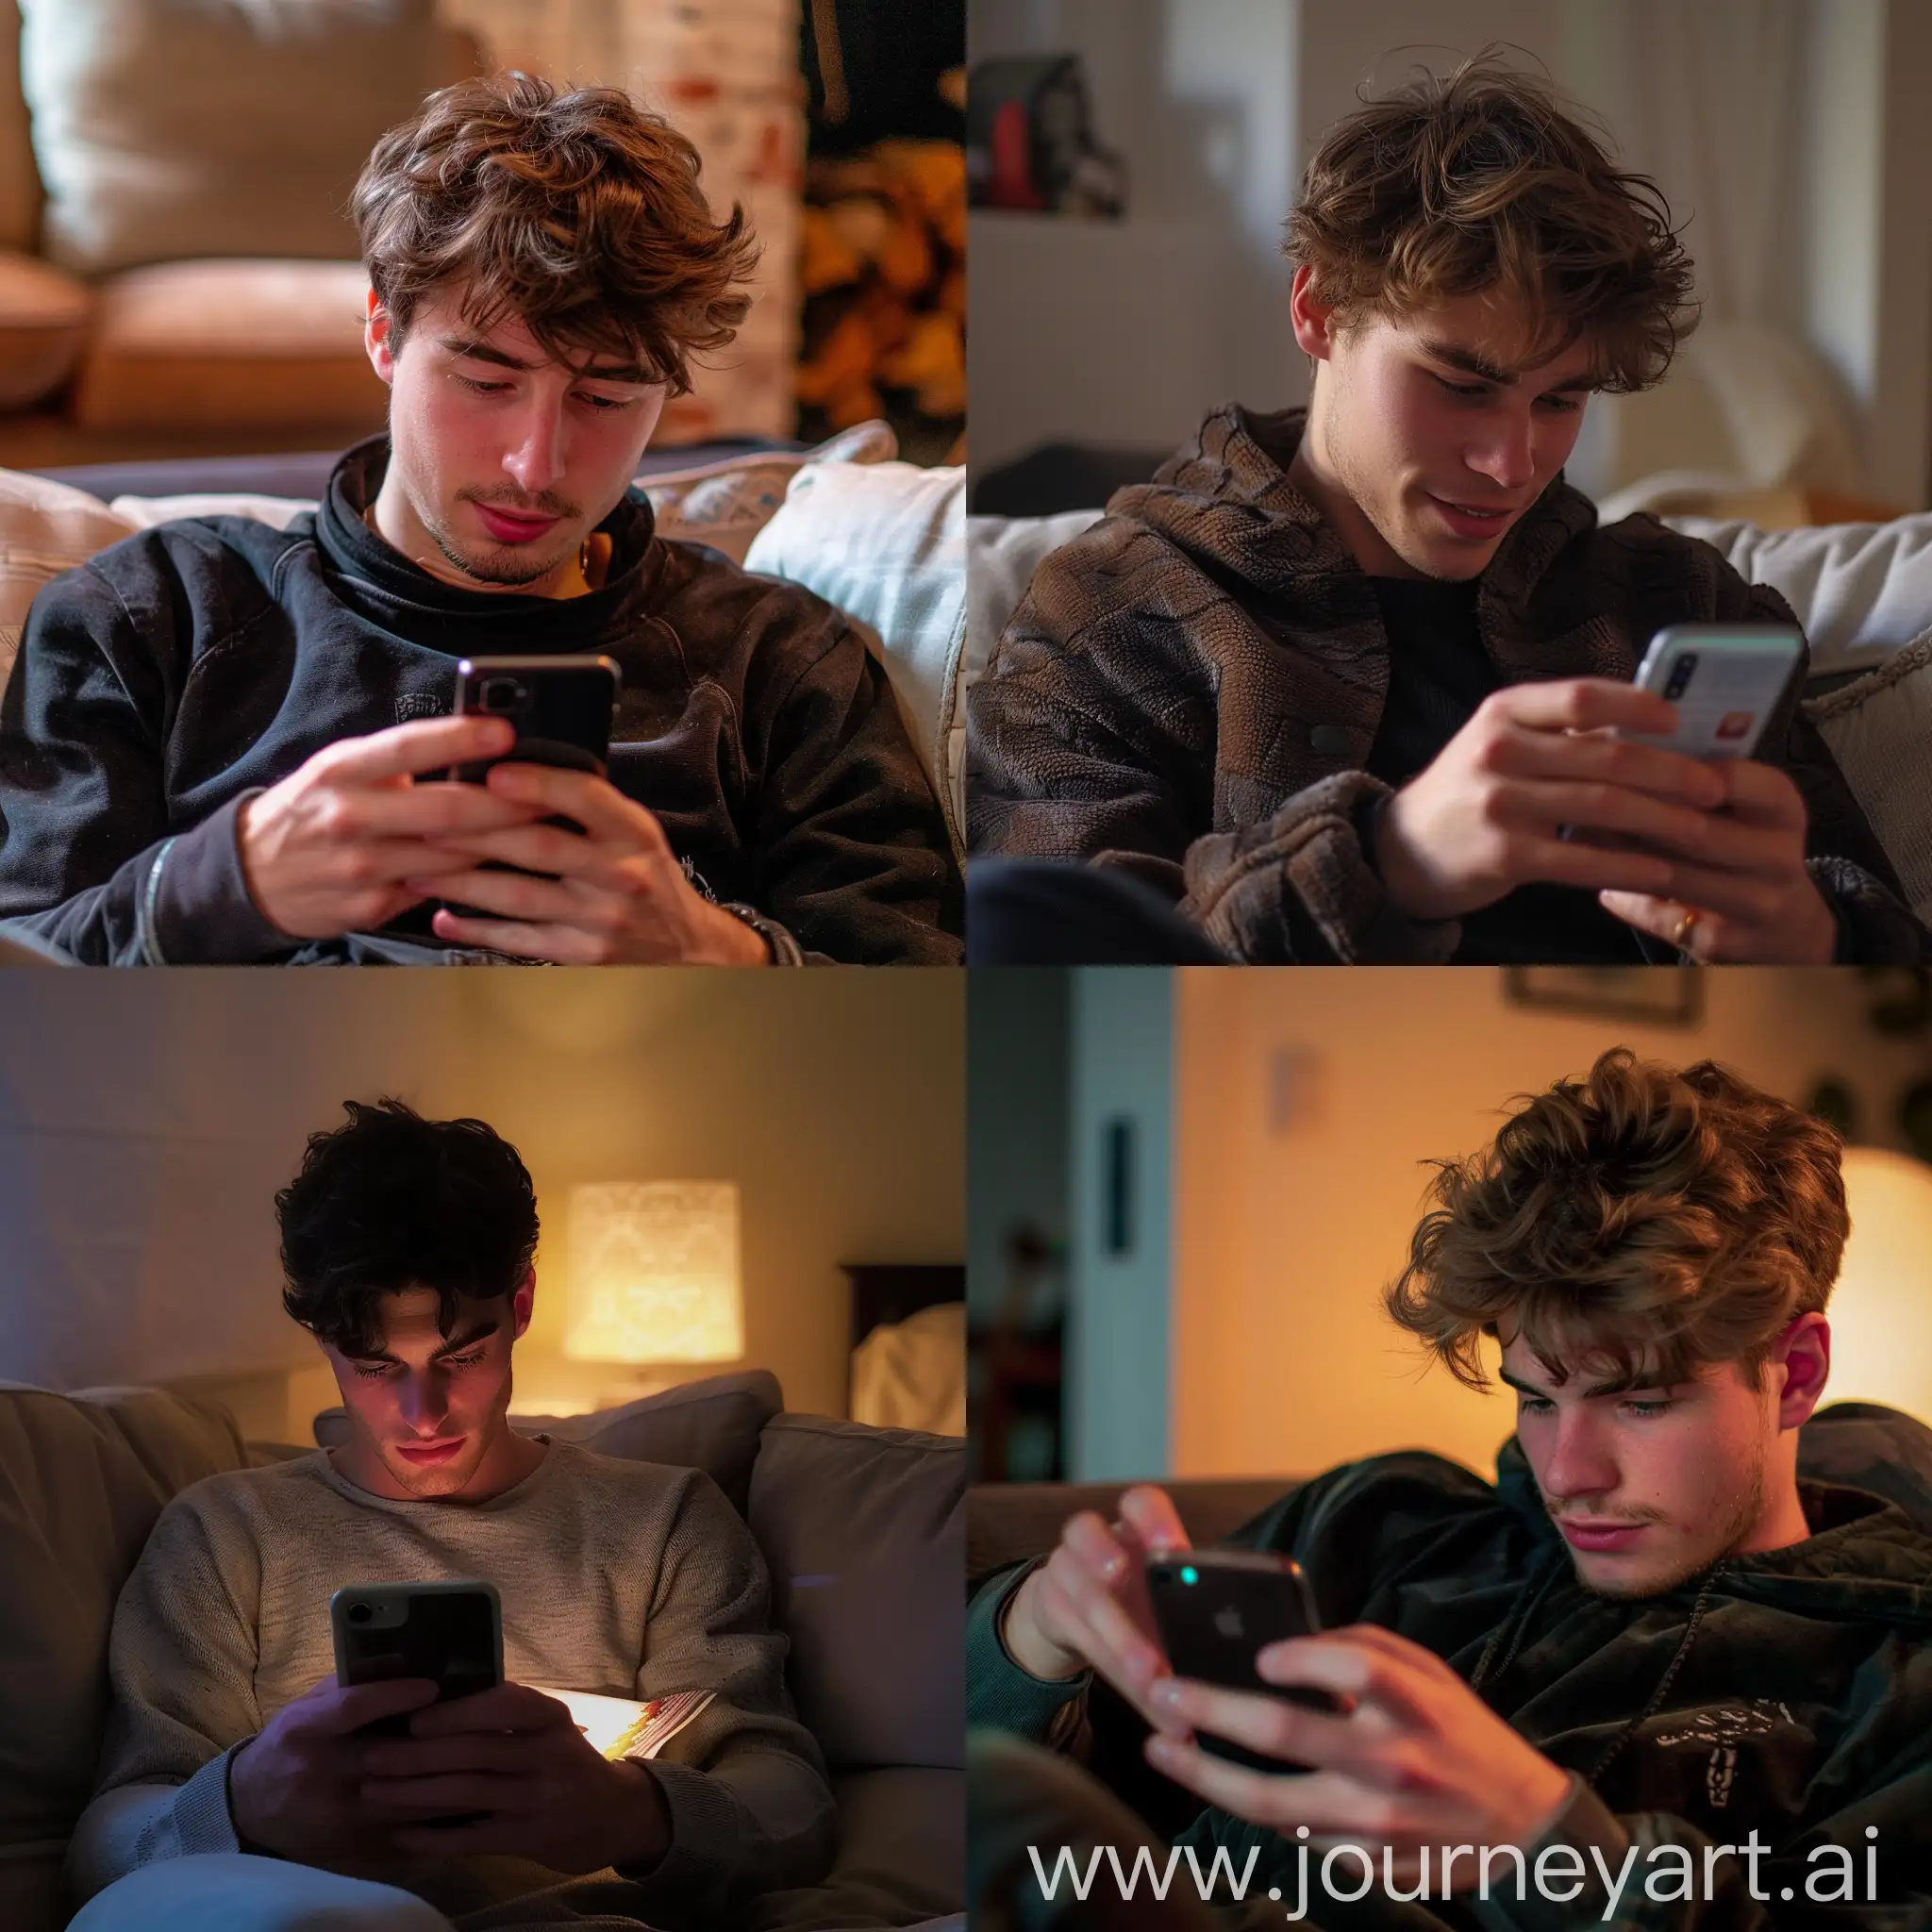 phone photo of a beautiful and charismatic young man, europeen type, reading something suprising, amazing, positively shocking on his iphone, on a sofa, with a small smile because he saw that he was being photographed, subdued ambience in the room.